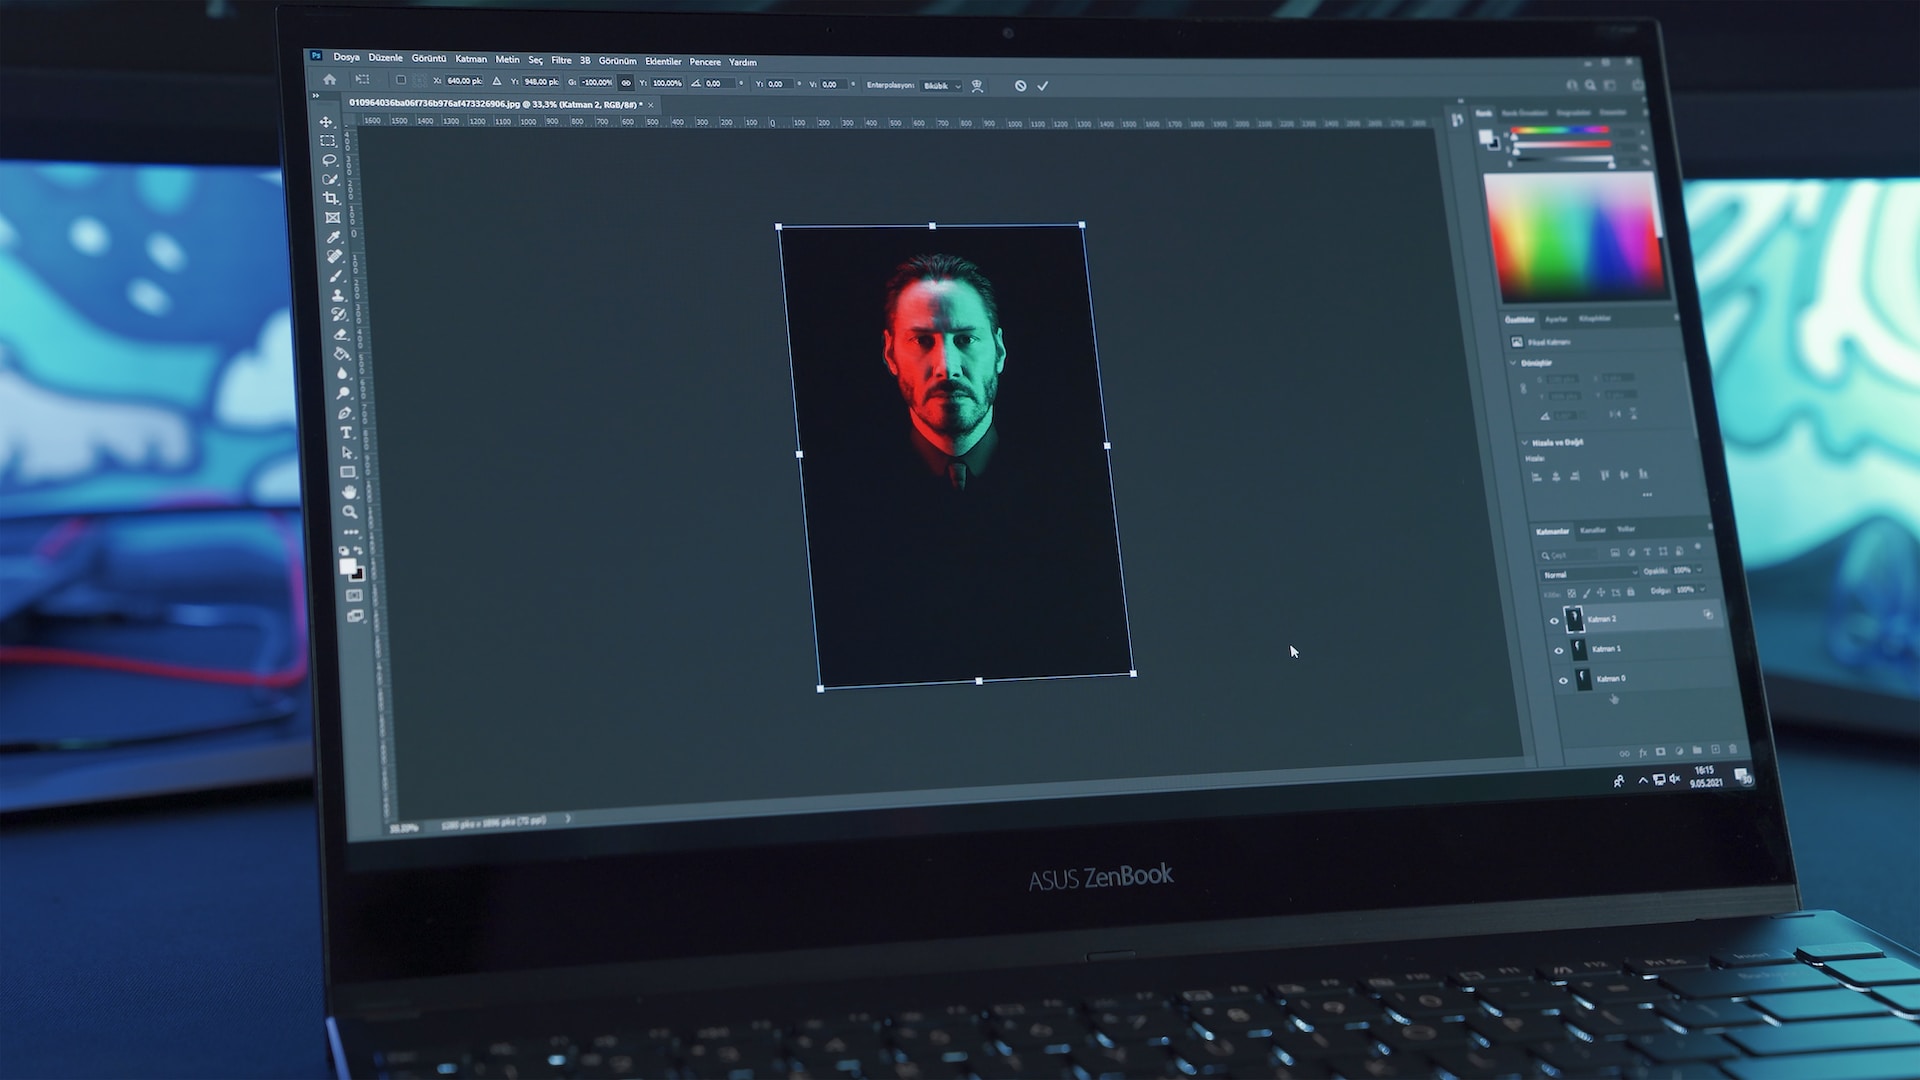 Adobe has released software for checking fake and real photos